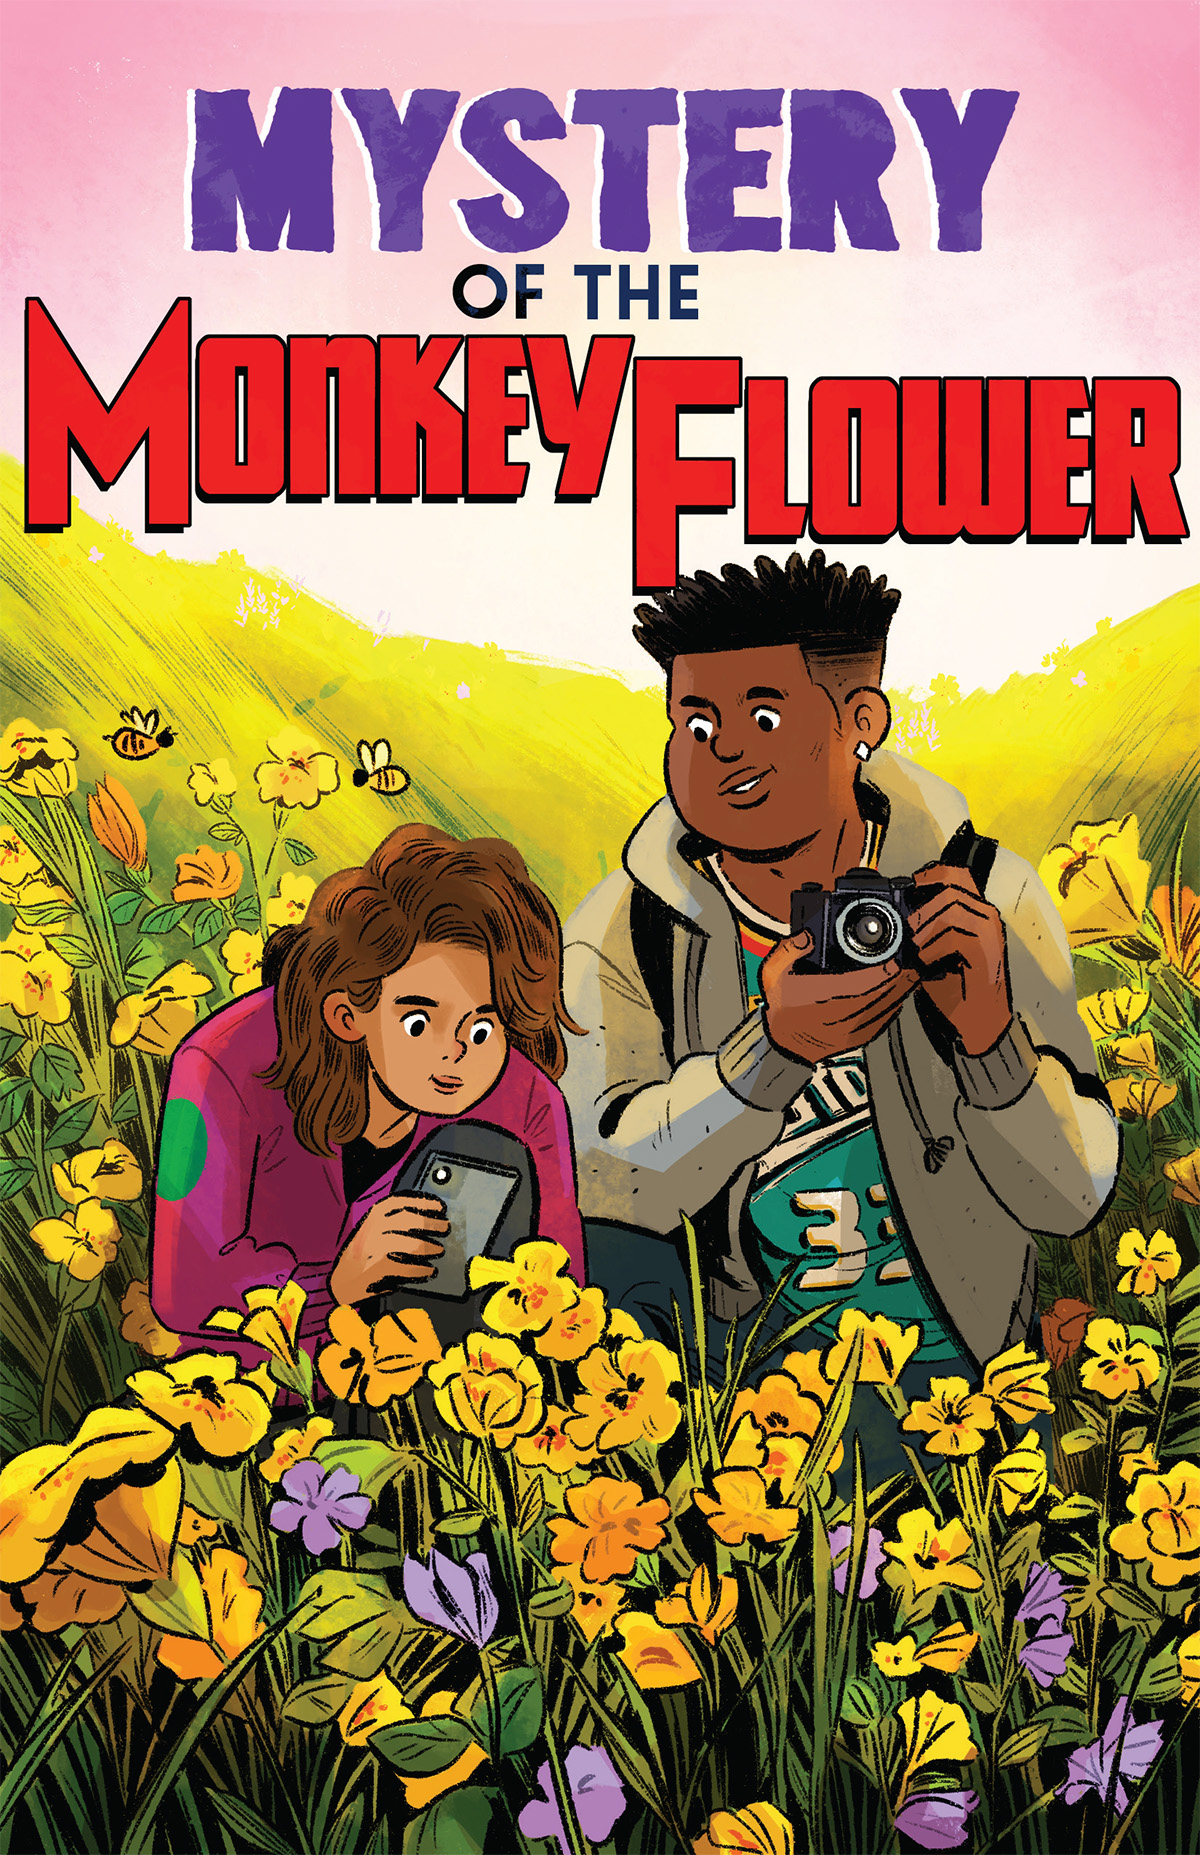 Comic book cover with girl and boy in a field photographing monkey flowers